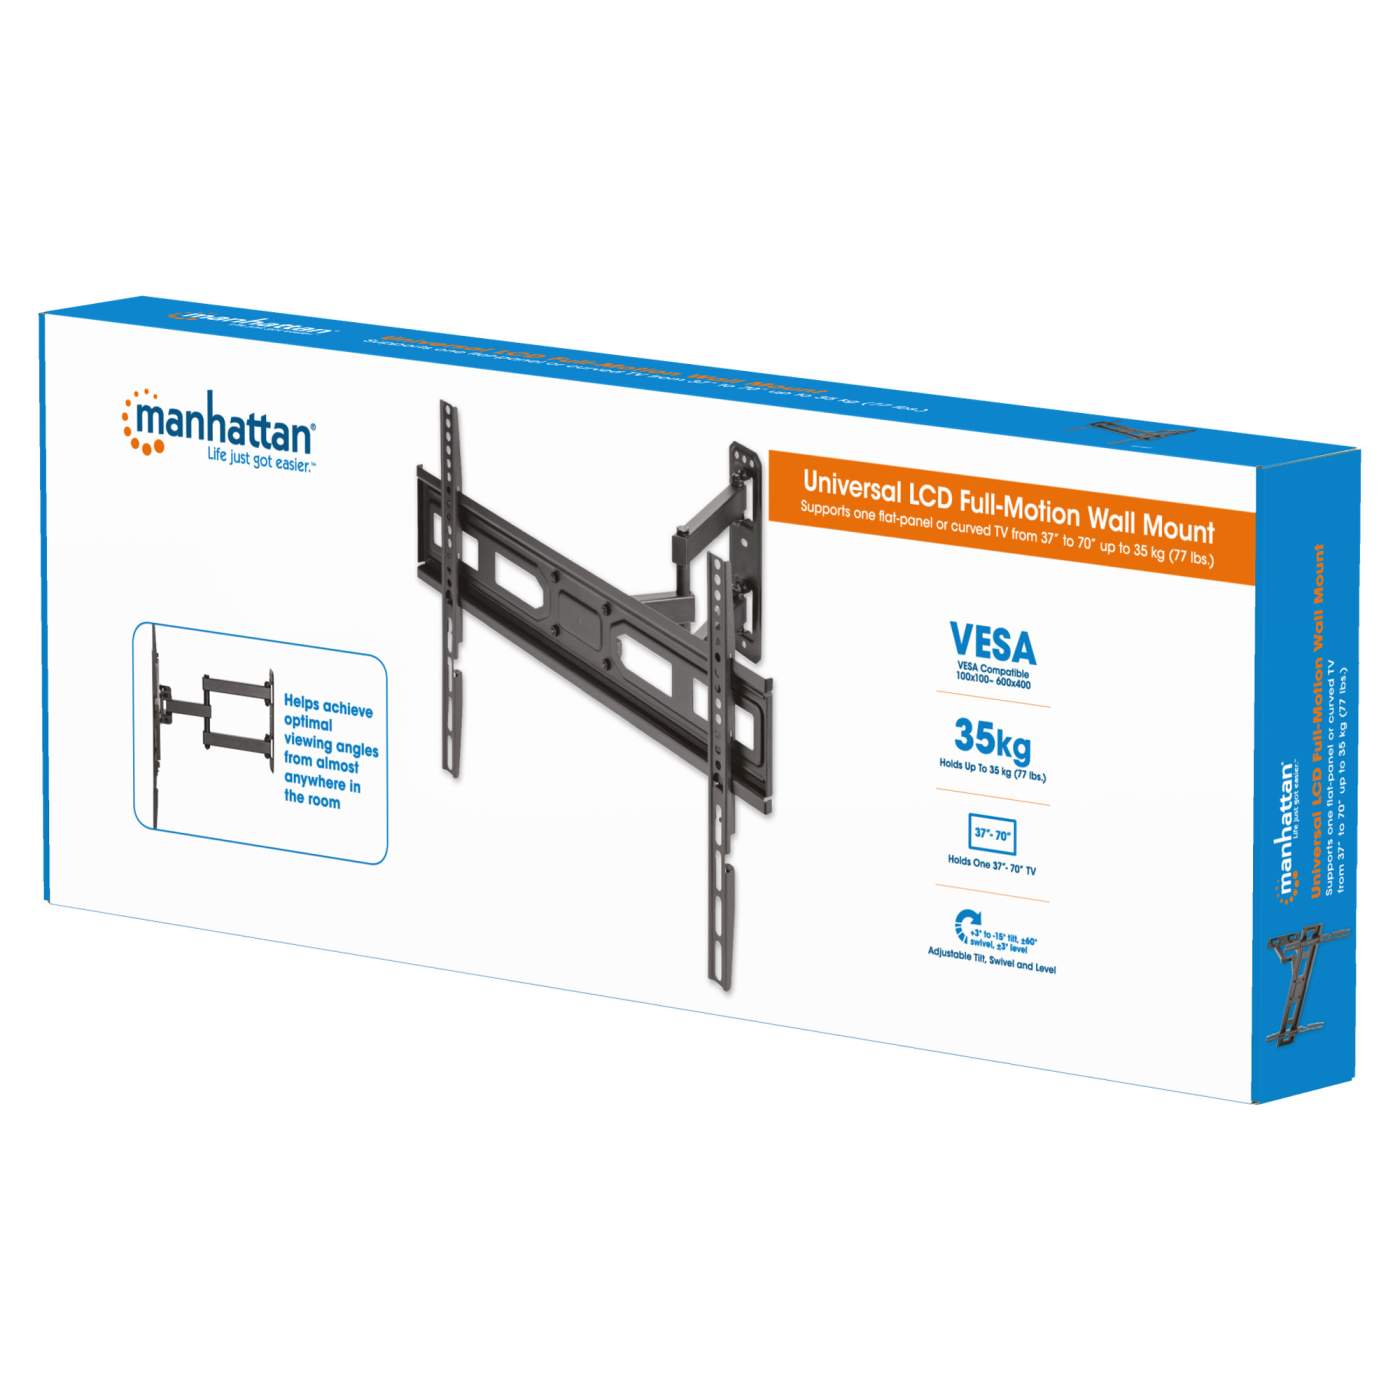 Universal Basic LCD Full-Motion Wall Mount Packaging Image 2